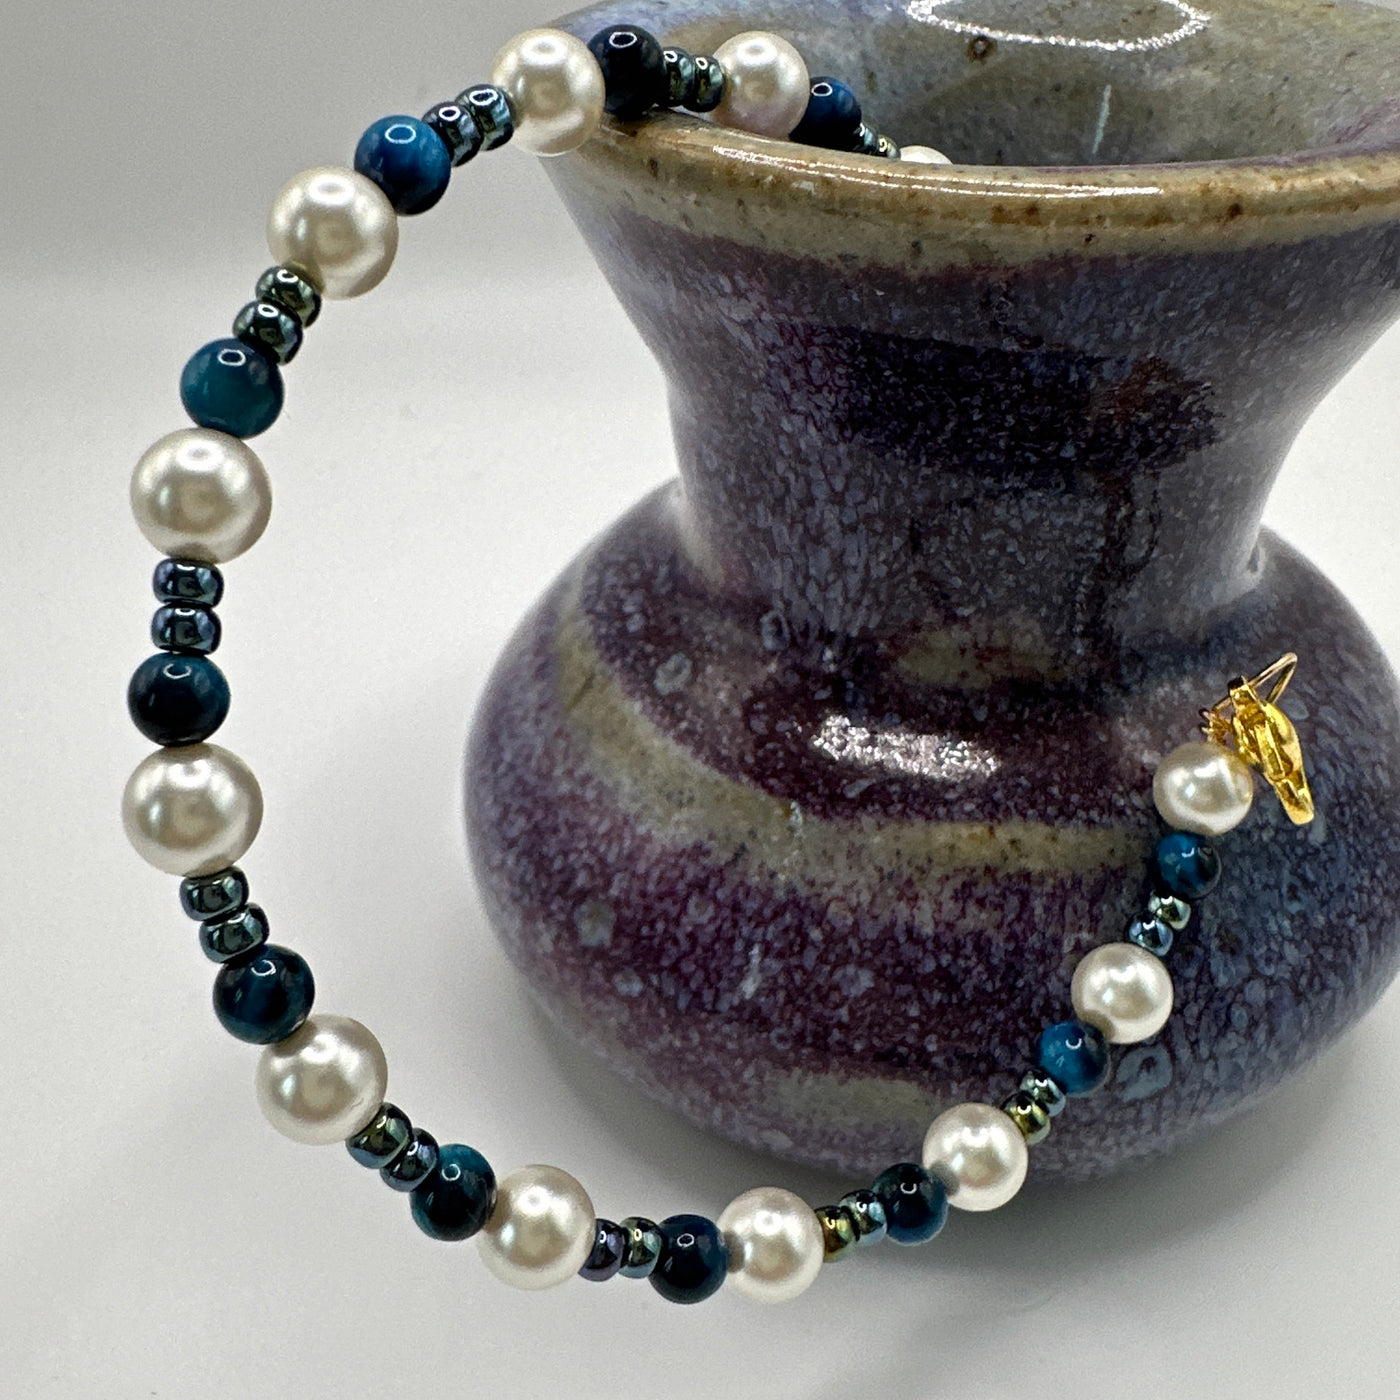 Rigid bracelet with blue tiger eye, white and metallic blue pearls